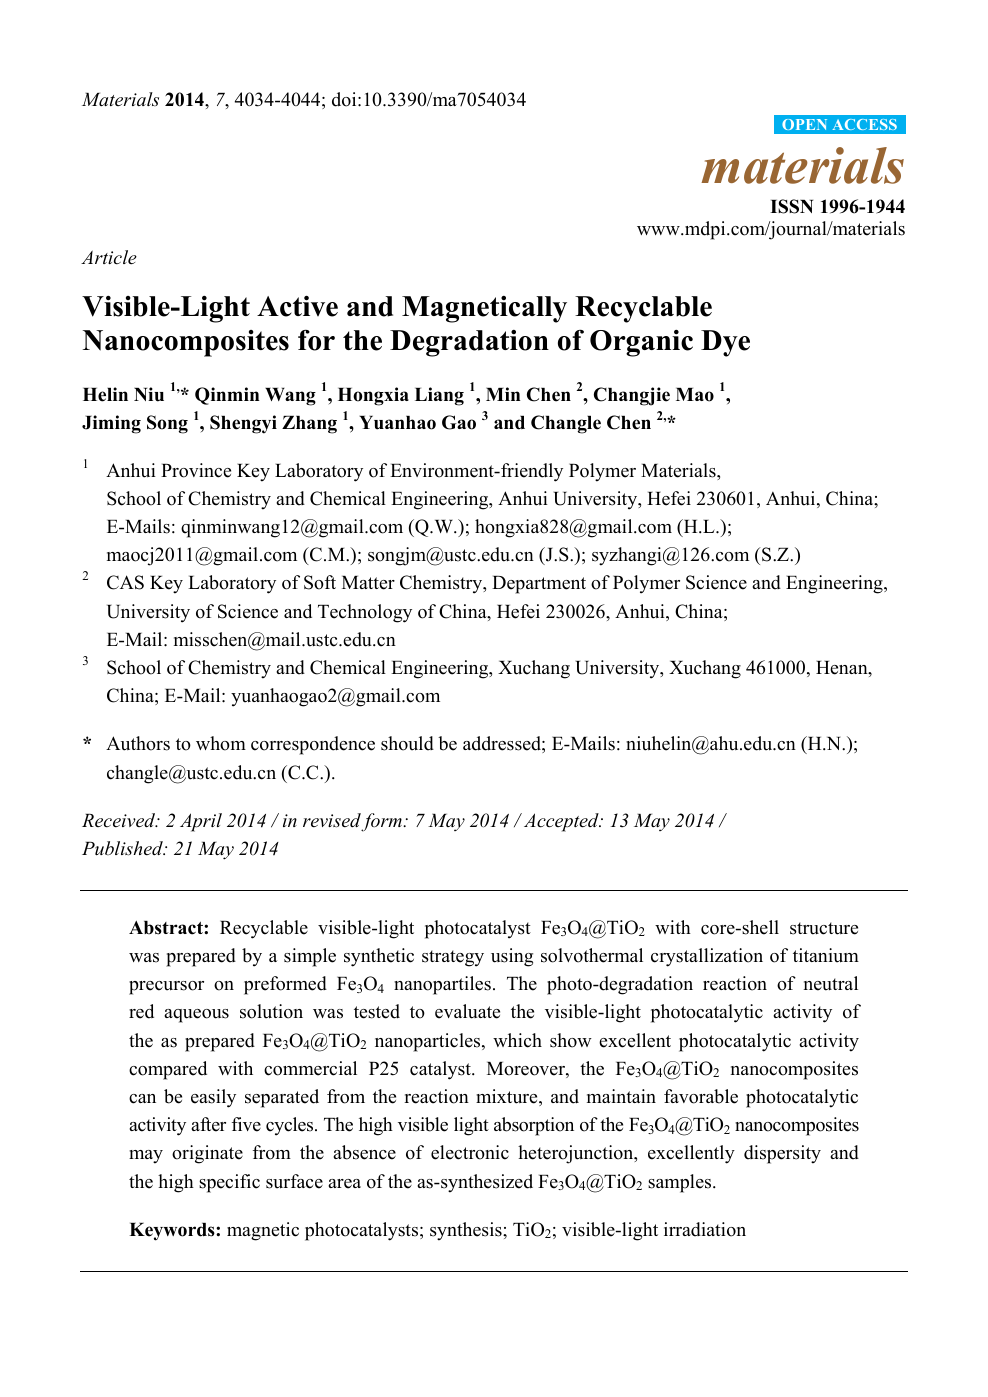 Visible Light Active And Magnetically Recyclable Nanocomposites For The Degradation Of Organic Dye Topic Of Research Paper In Nano Technology Download Scholarly Article Pdf And Read For Free On Cyberleninka Open Science Hub